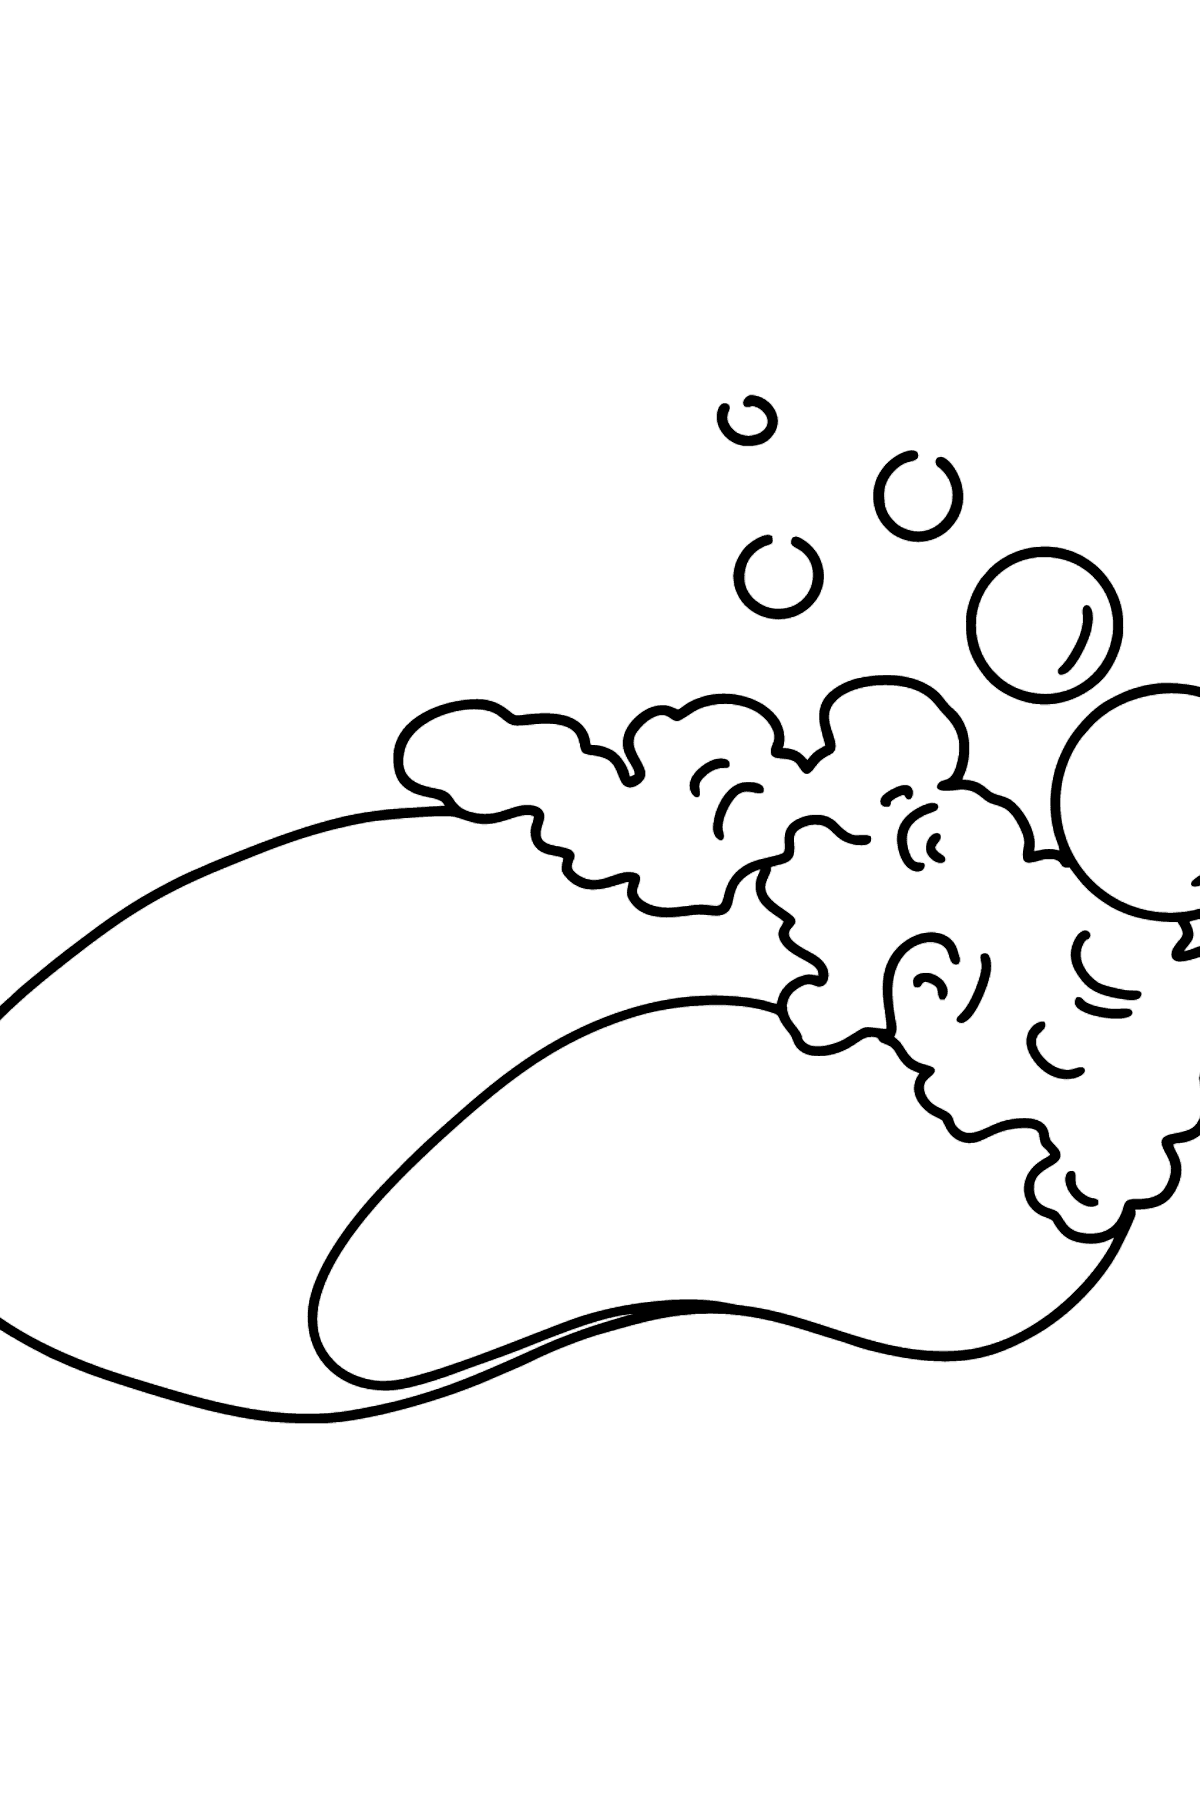 Soap coloring page - Coloring Pages for Kids